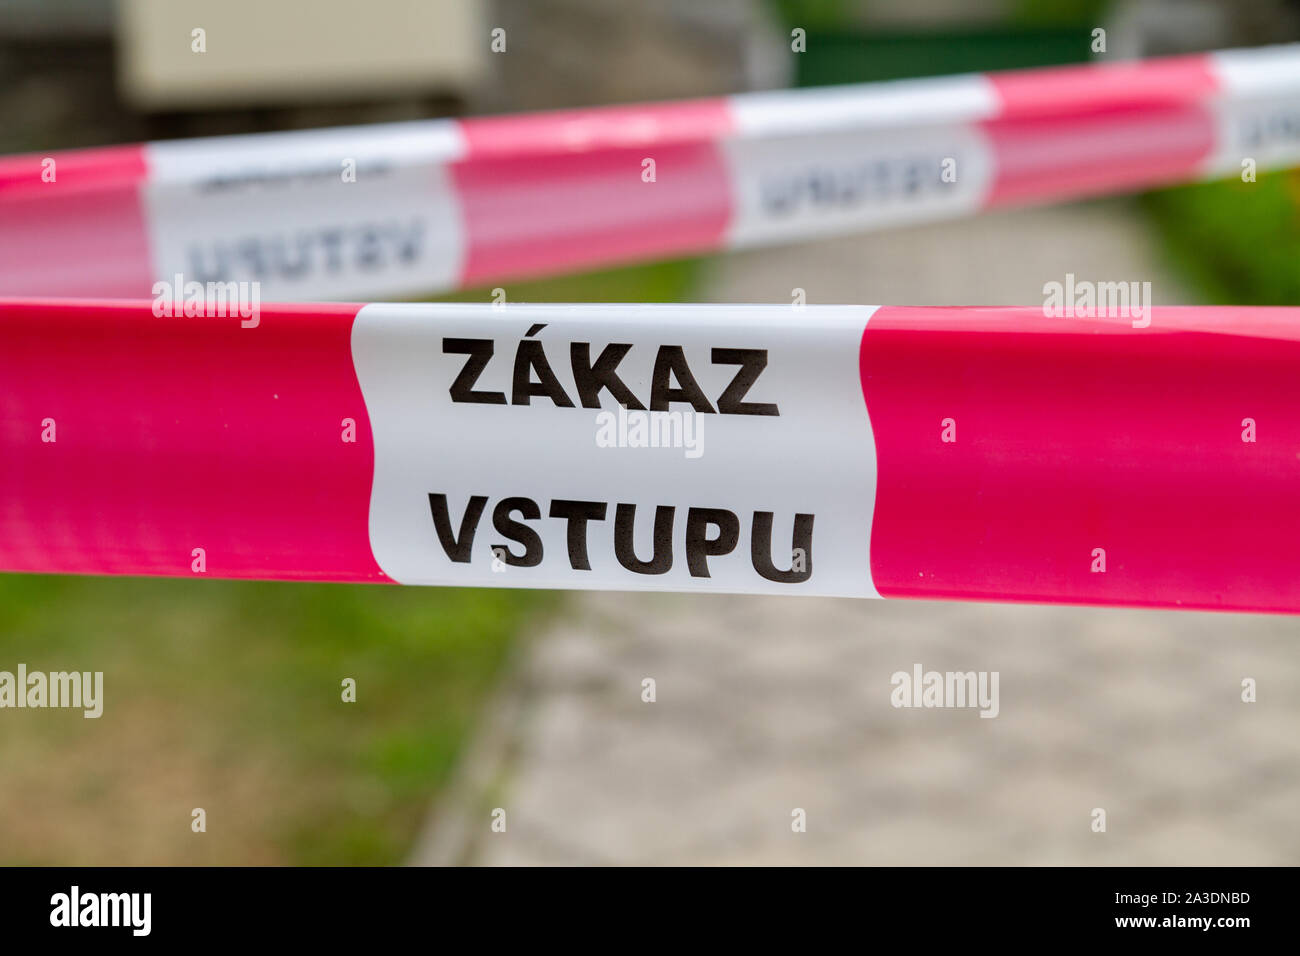 a cordon with the words 'Zakaz vstupu' which in Slovak mean 'No entry' or 'Entry forbidden' Stock Photo